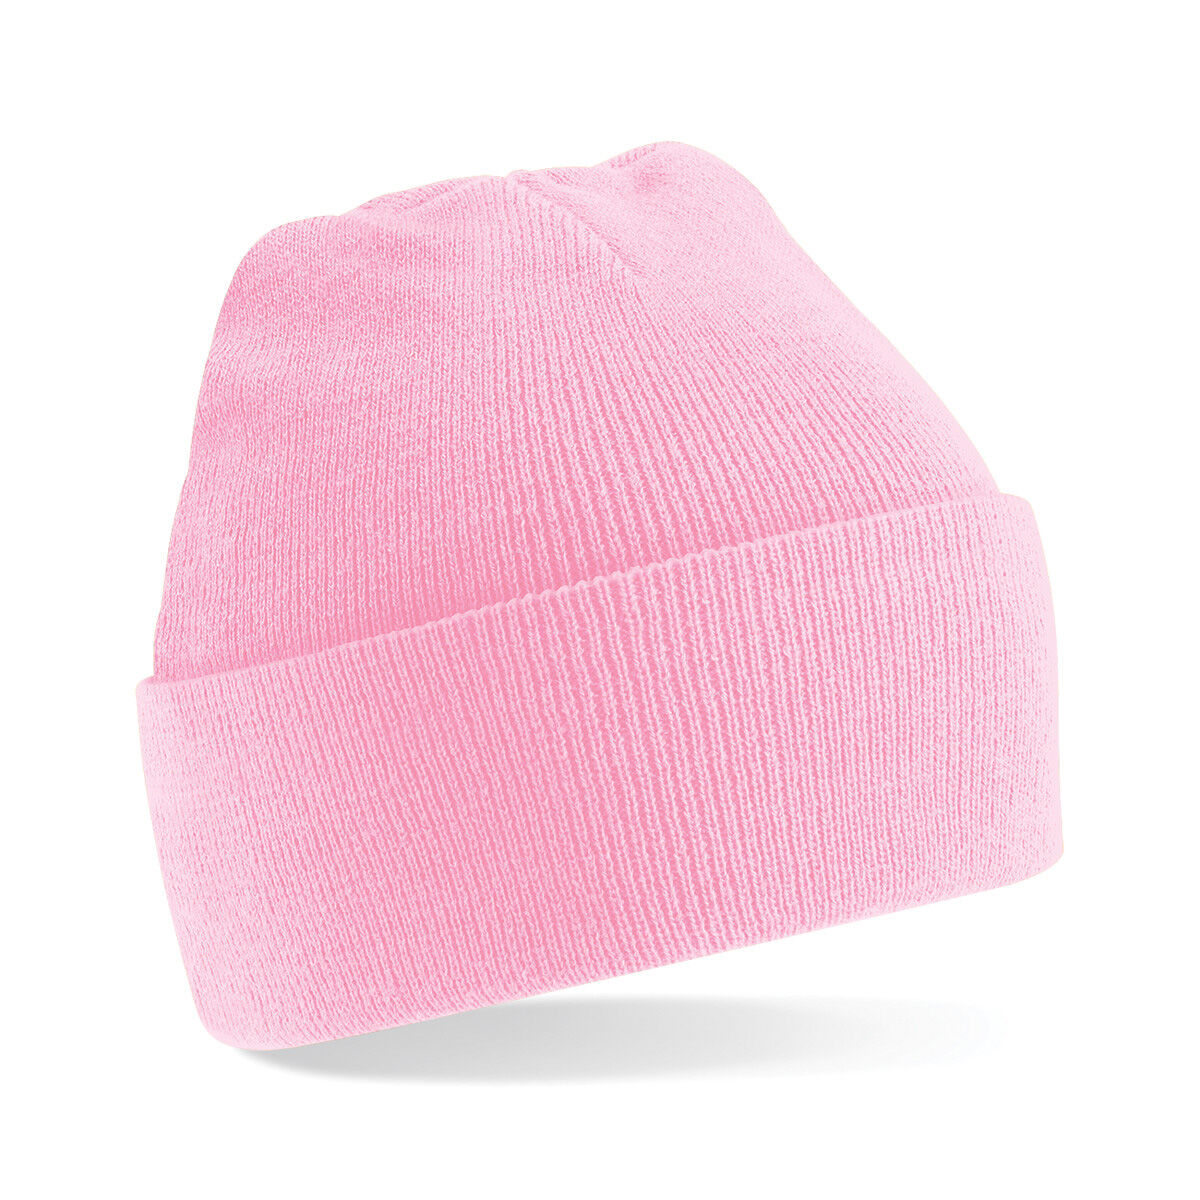 Beanie Hat with Cuff - Classic Pink